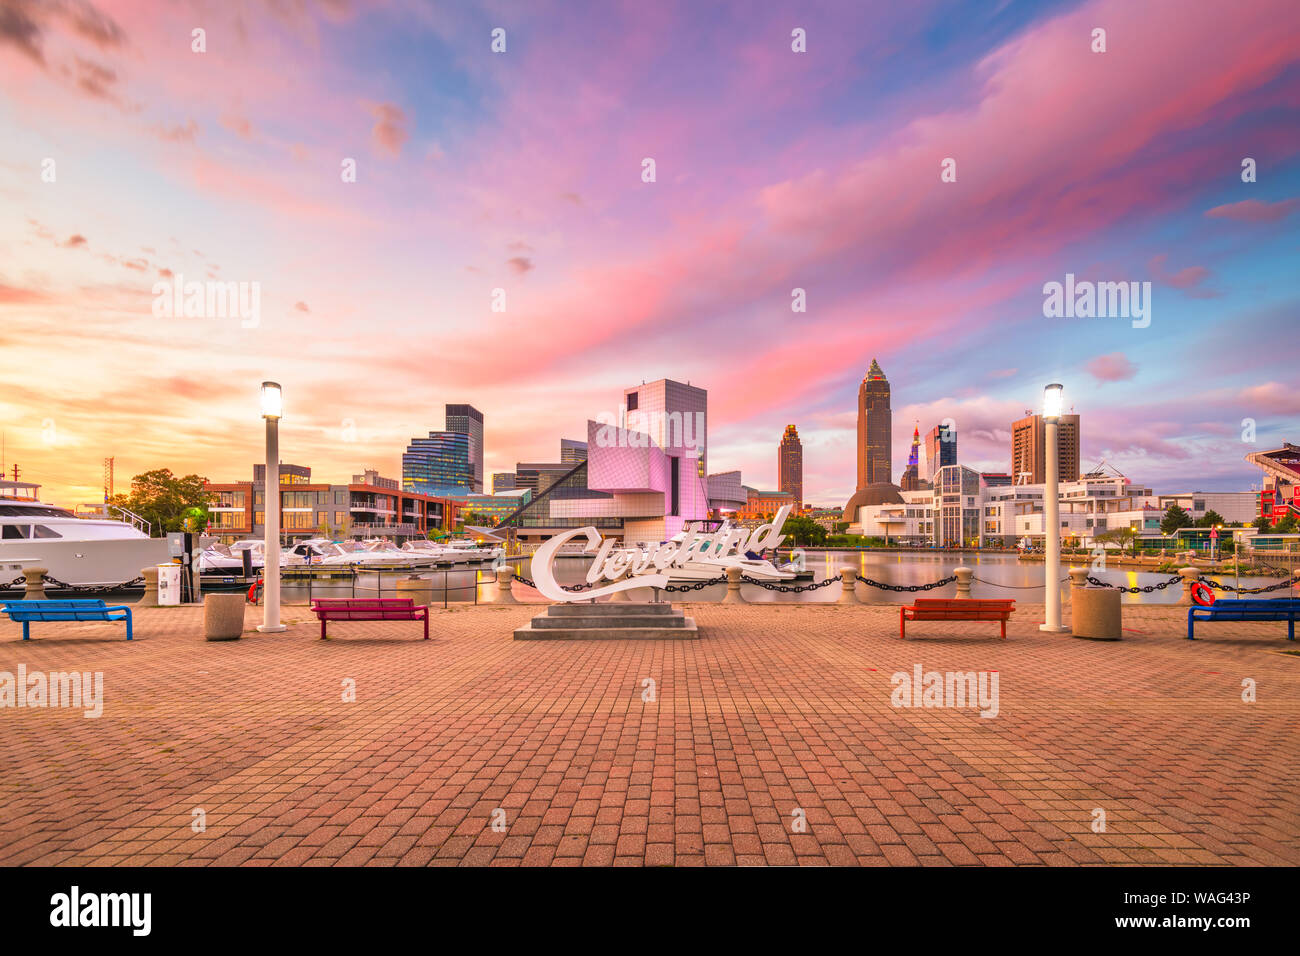 AUGUS1 10, 2019 - CLEVELAND, OHIO: The landmark skyline of downtown Cleveland from Voinovich Bicentennial Park in the early morning. Stock Photo